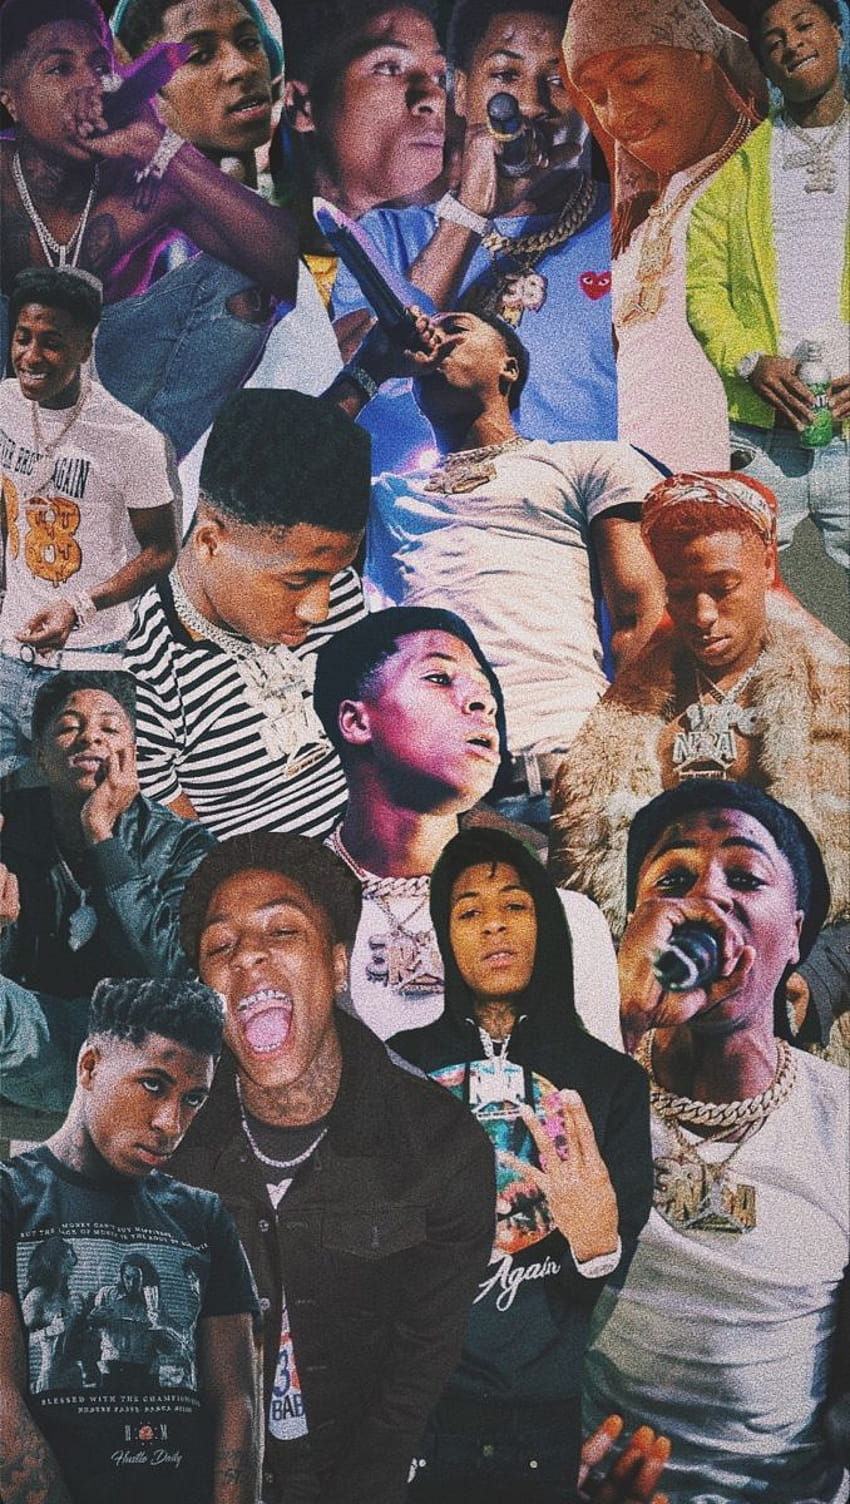 NBA Youngboy Wallpapers on WallpaperDog